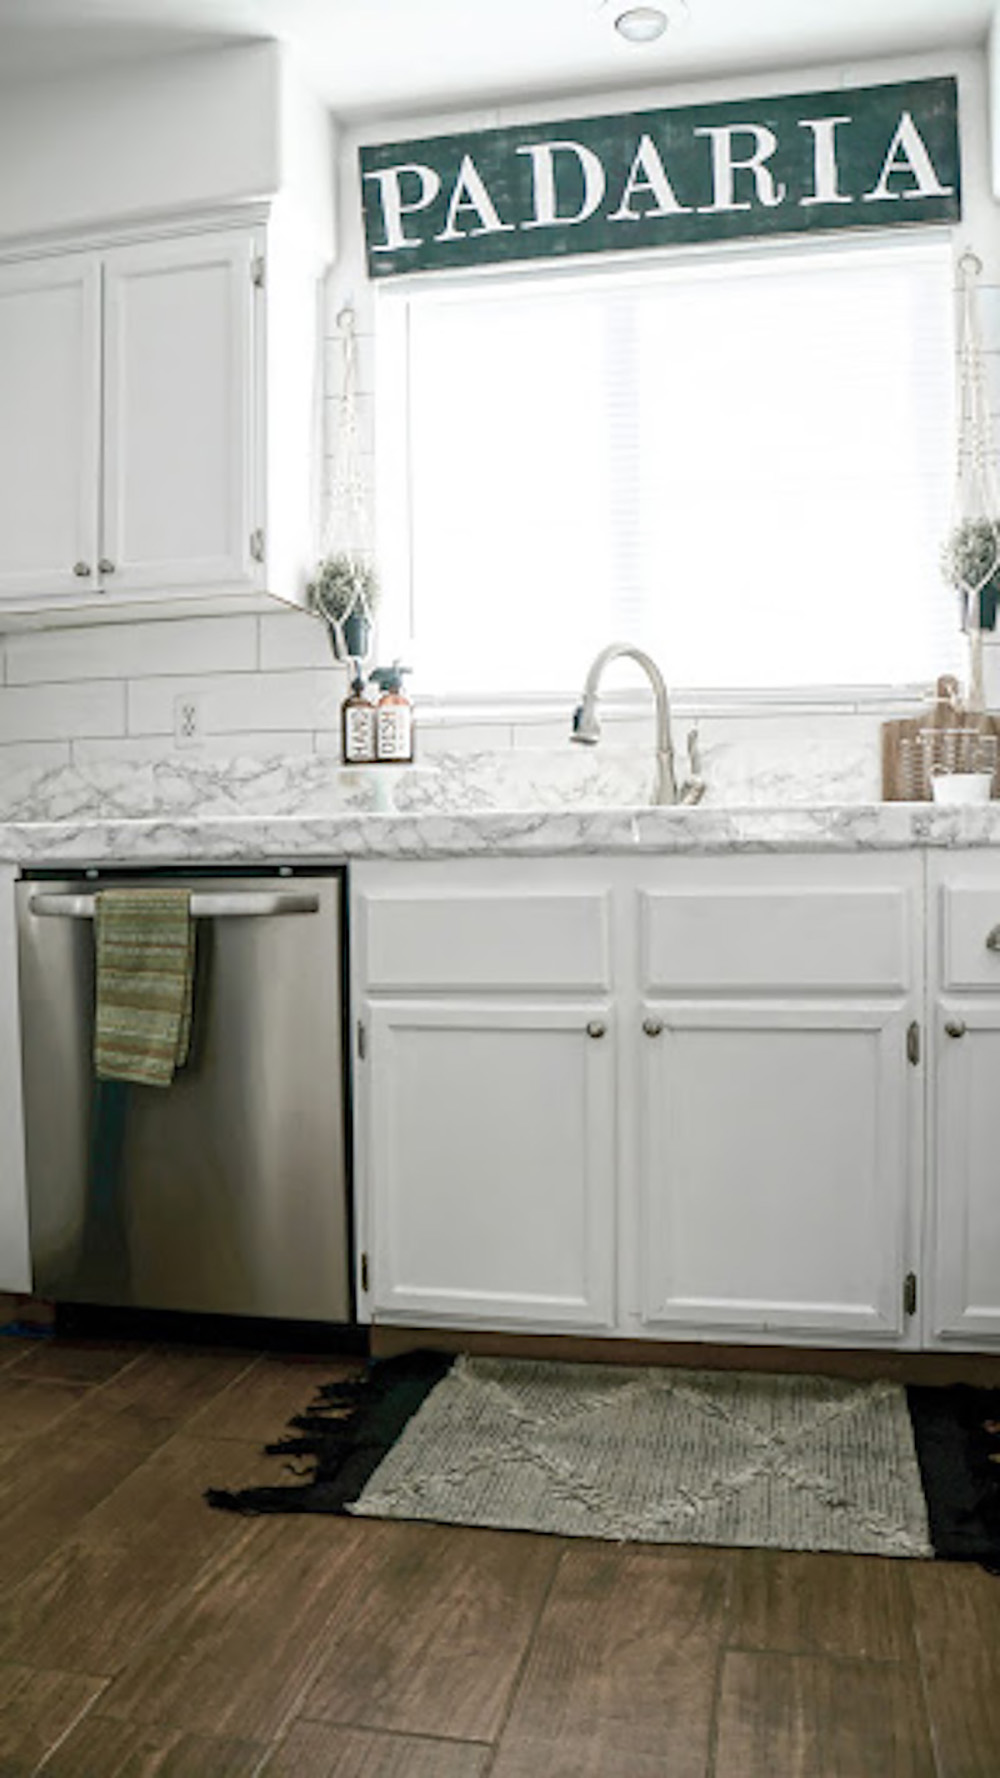 A window sits above a kitchen sink surrounded by white cabinets.